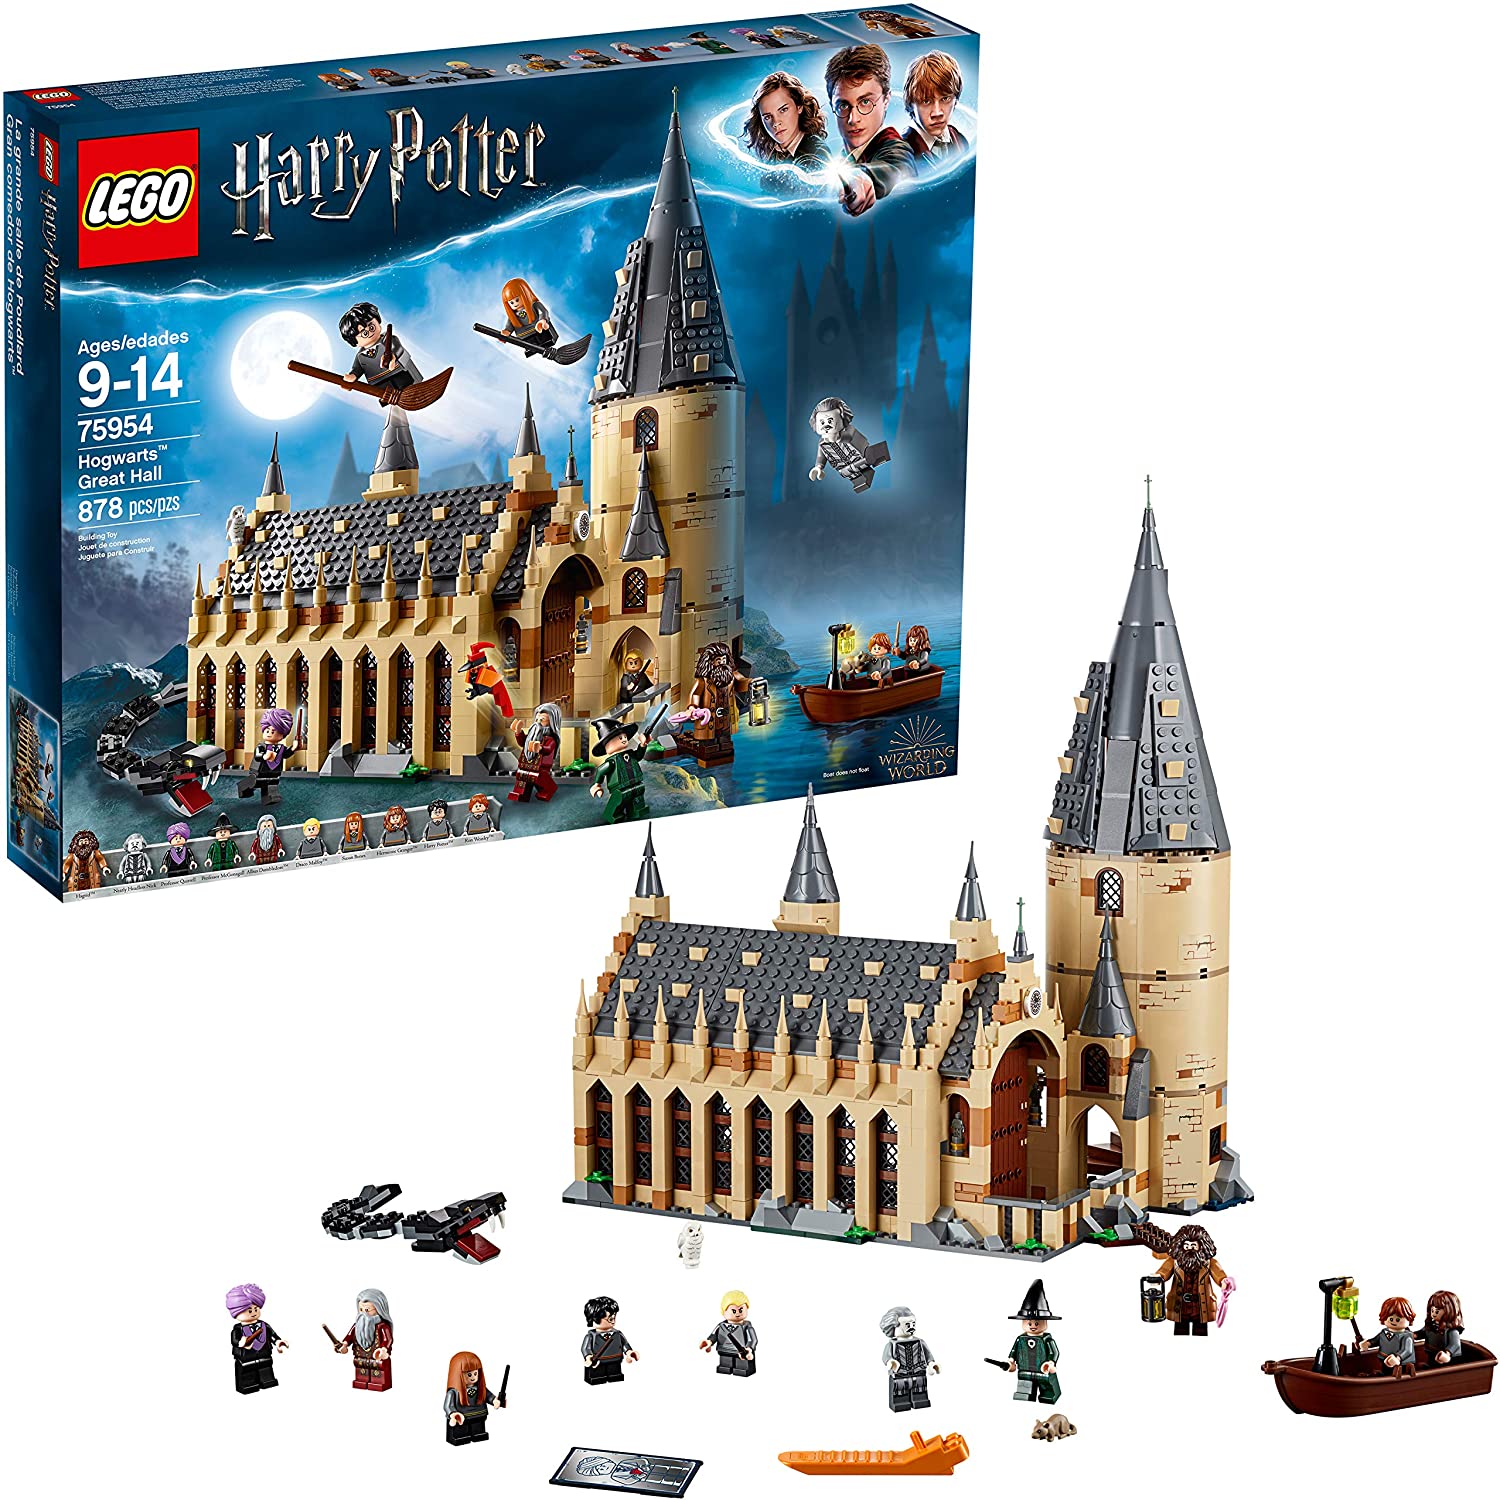 Lego harry potter hogwarts great hall 75954 gsm arena compare